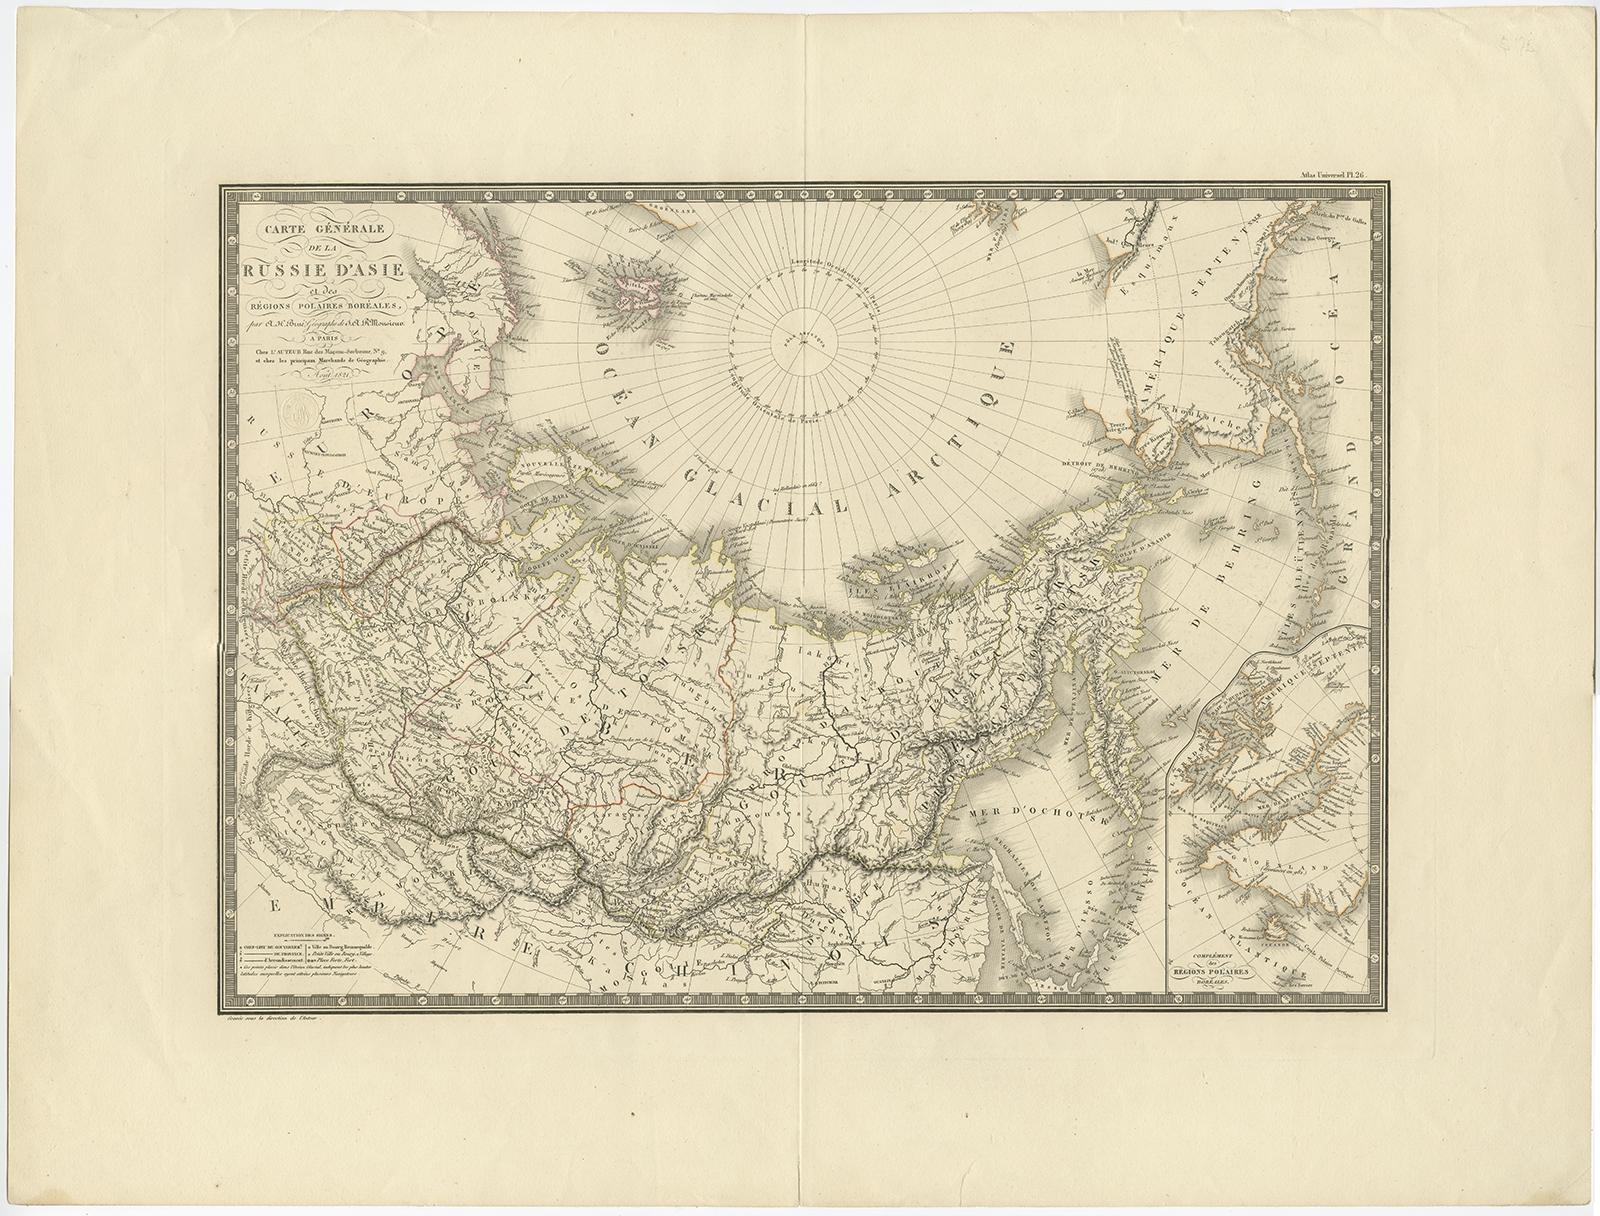 Antique map titled 'Carte Générale de la Russie d'Asie et des régions polaires boréales'. 

Large map of Russia and the Arctic Ocean. From the Pole, the map extends through all of northern Asia and Russia, including European and eastern Russia, and